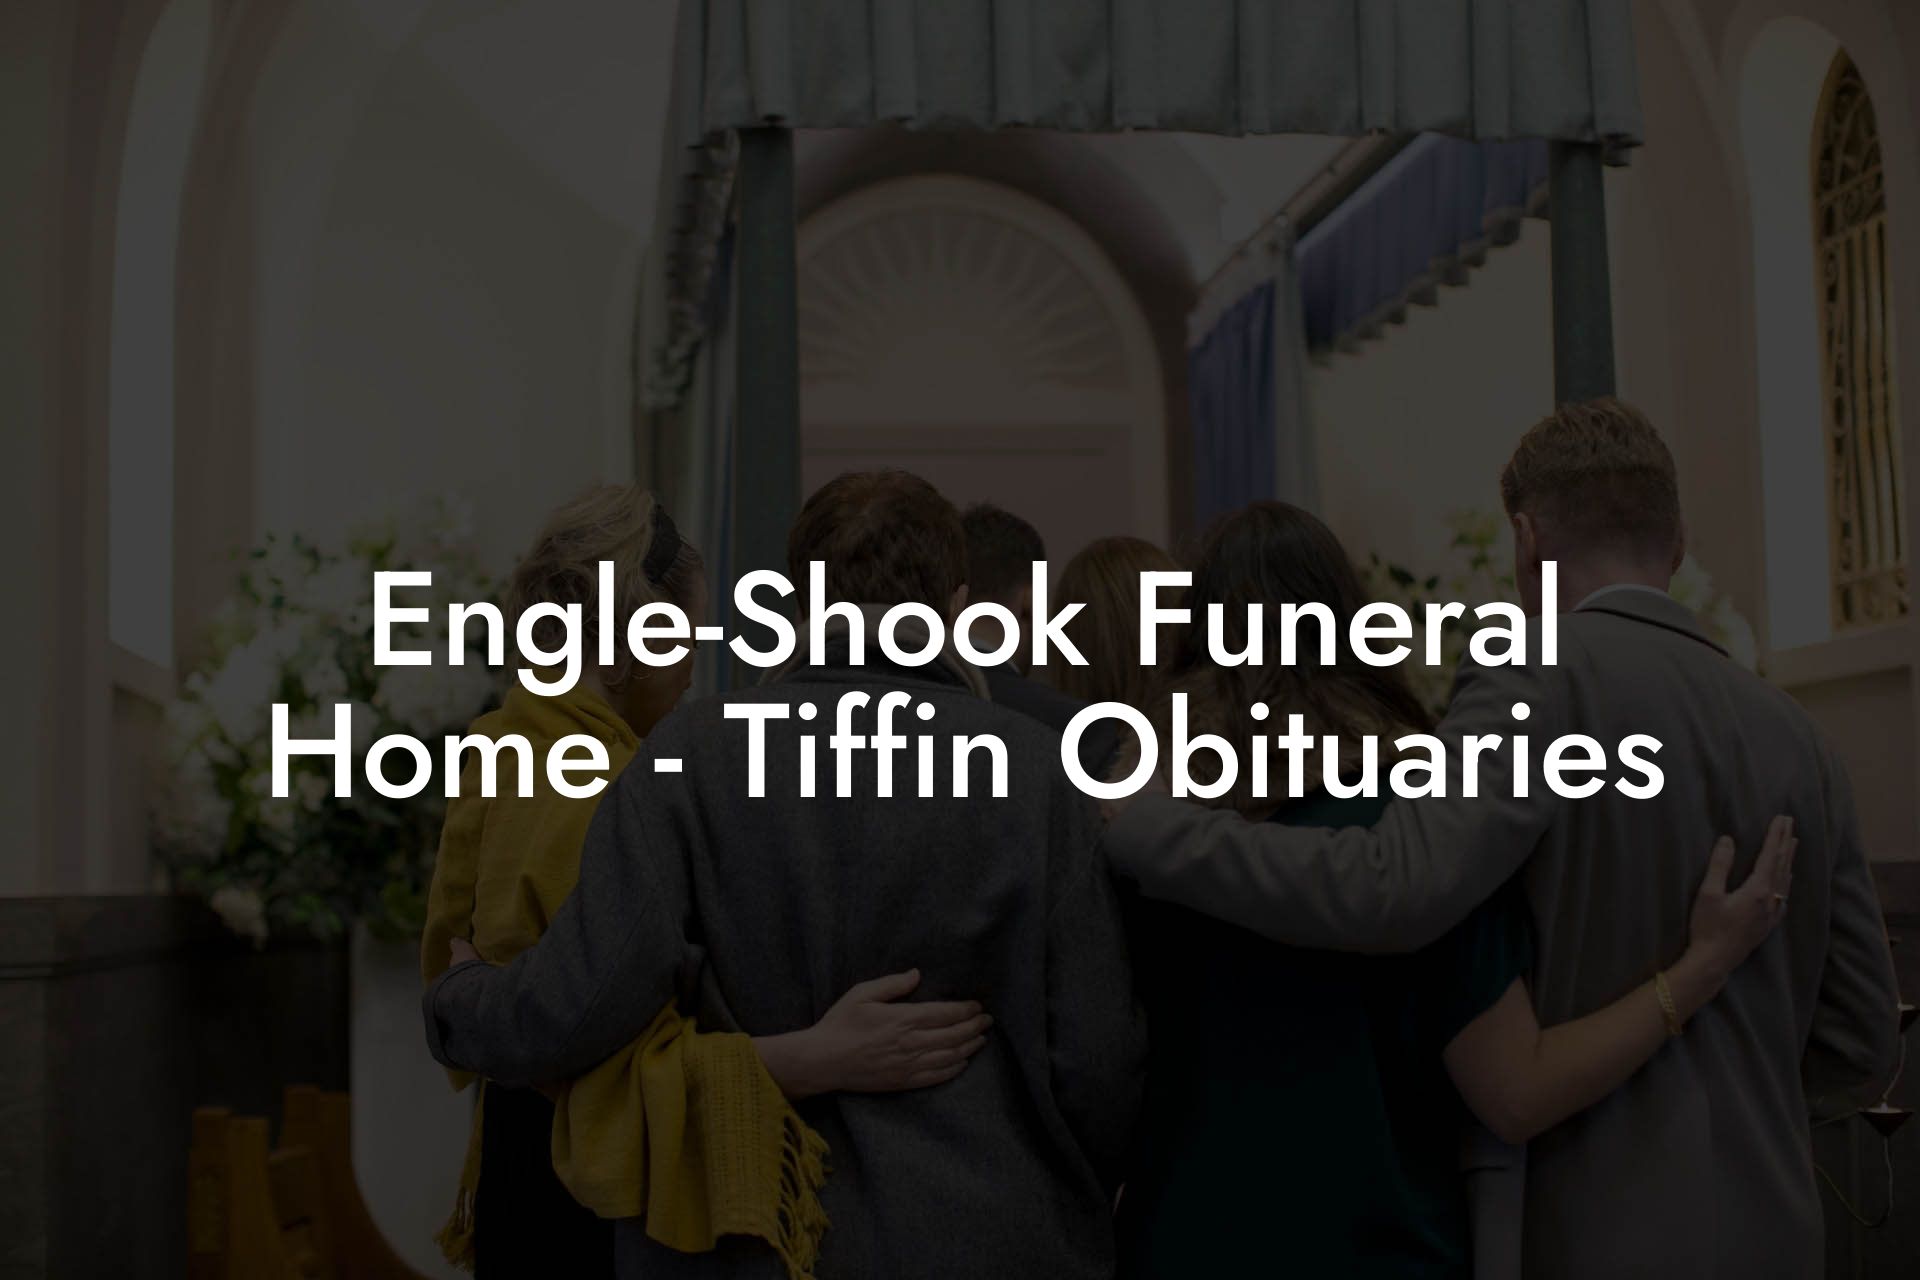 Engle-Shook Funeral Home - Tiffin Obituaries